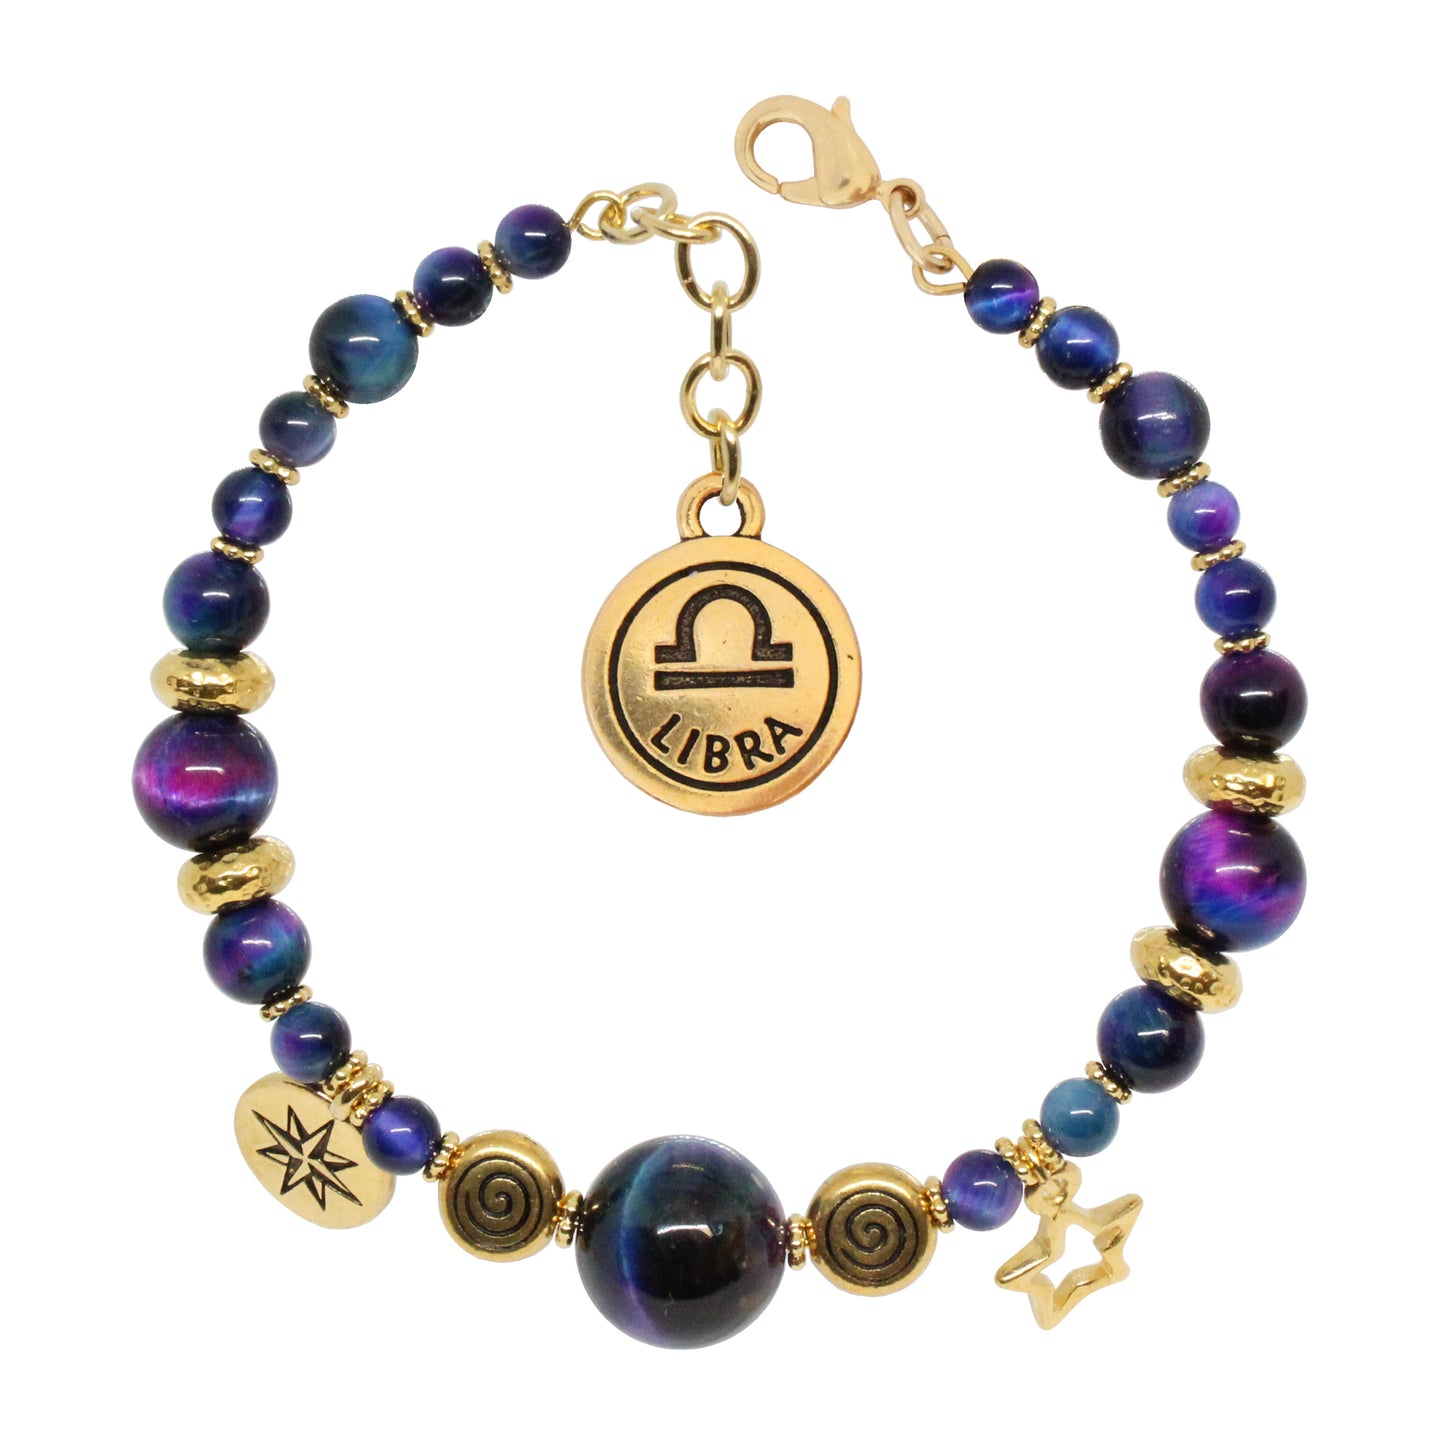 Rainbow Tiger's Eye Bracelet with zodiac charm / 6 to 7 Inch wrist size / gold pewter beads and charms / choose your sign